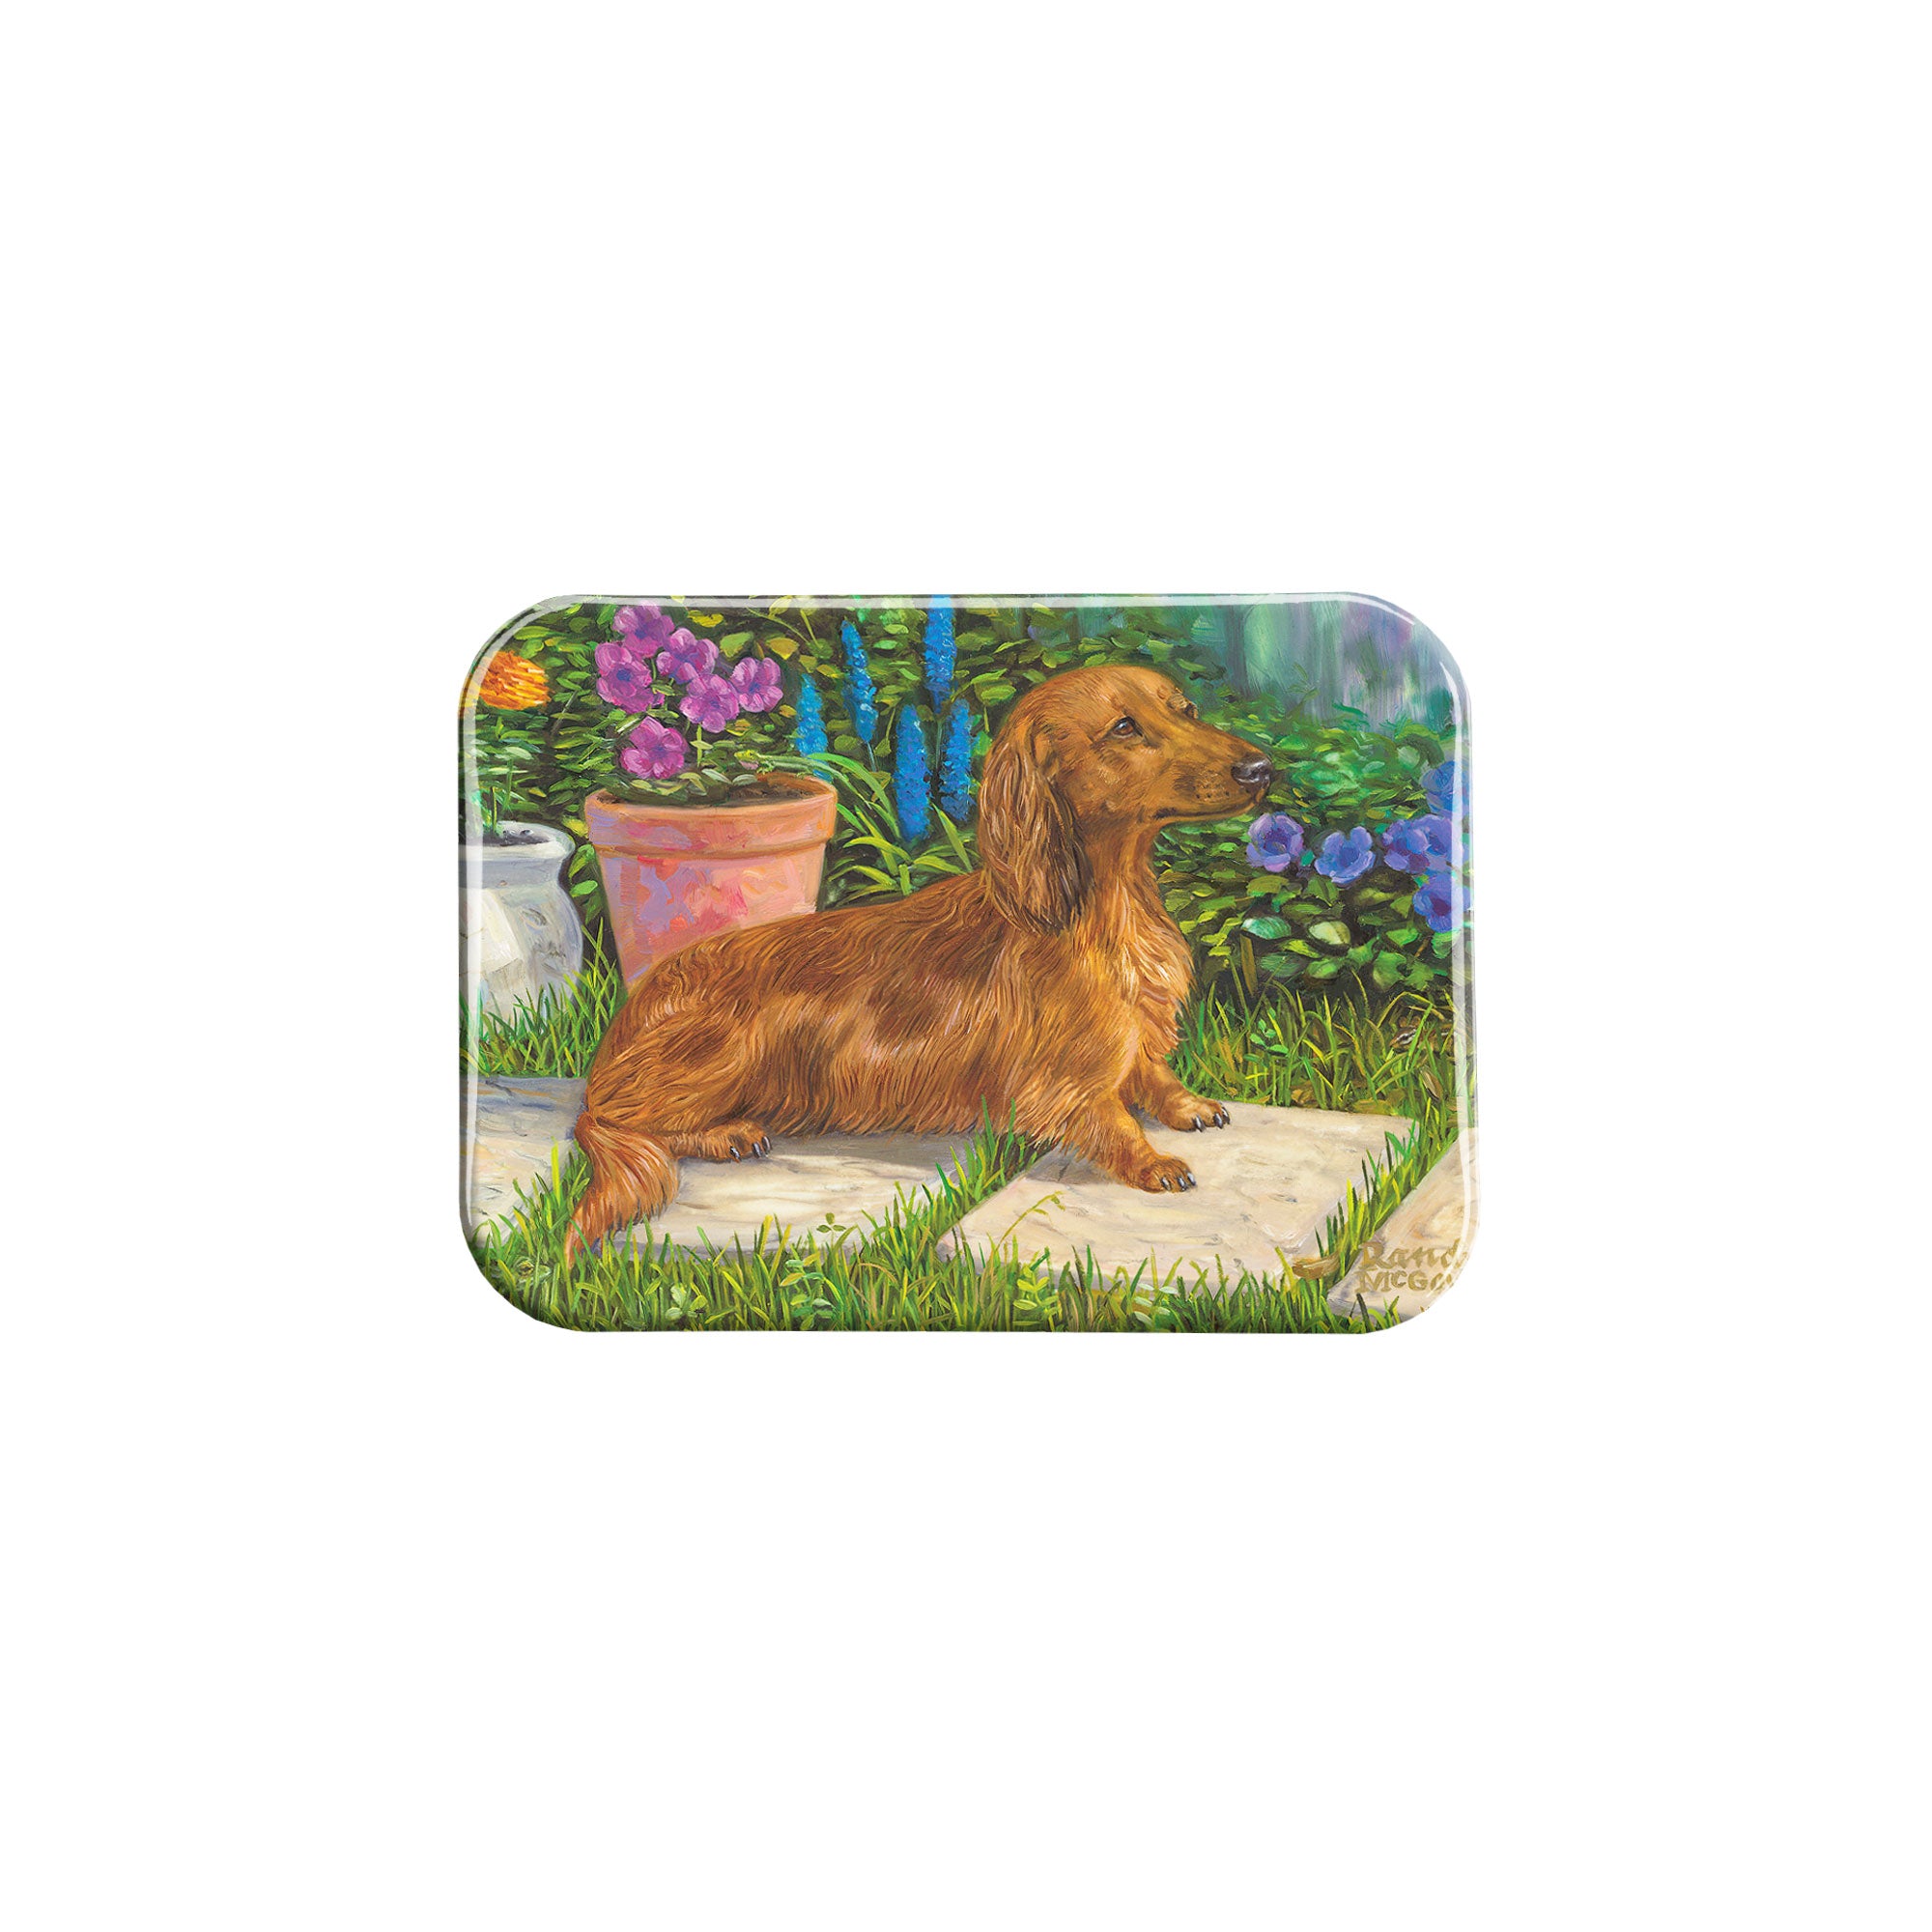 "Fluff And Flowers" - 2.5" X 3.5" Rectangle Fridge Magnets